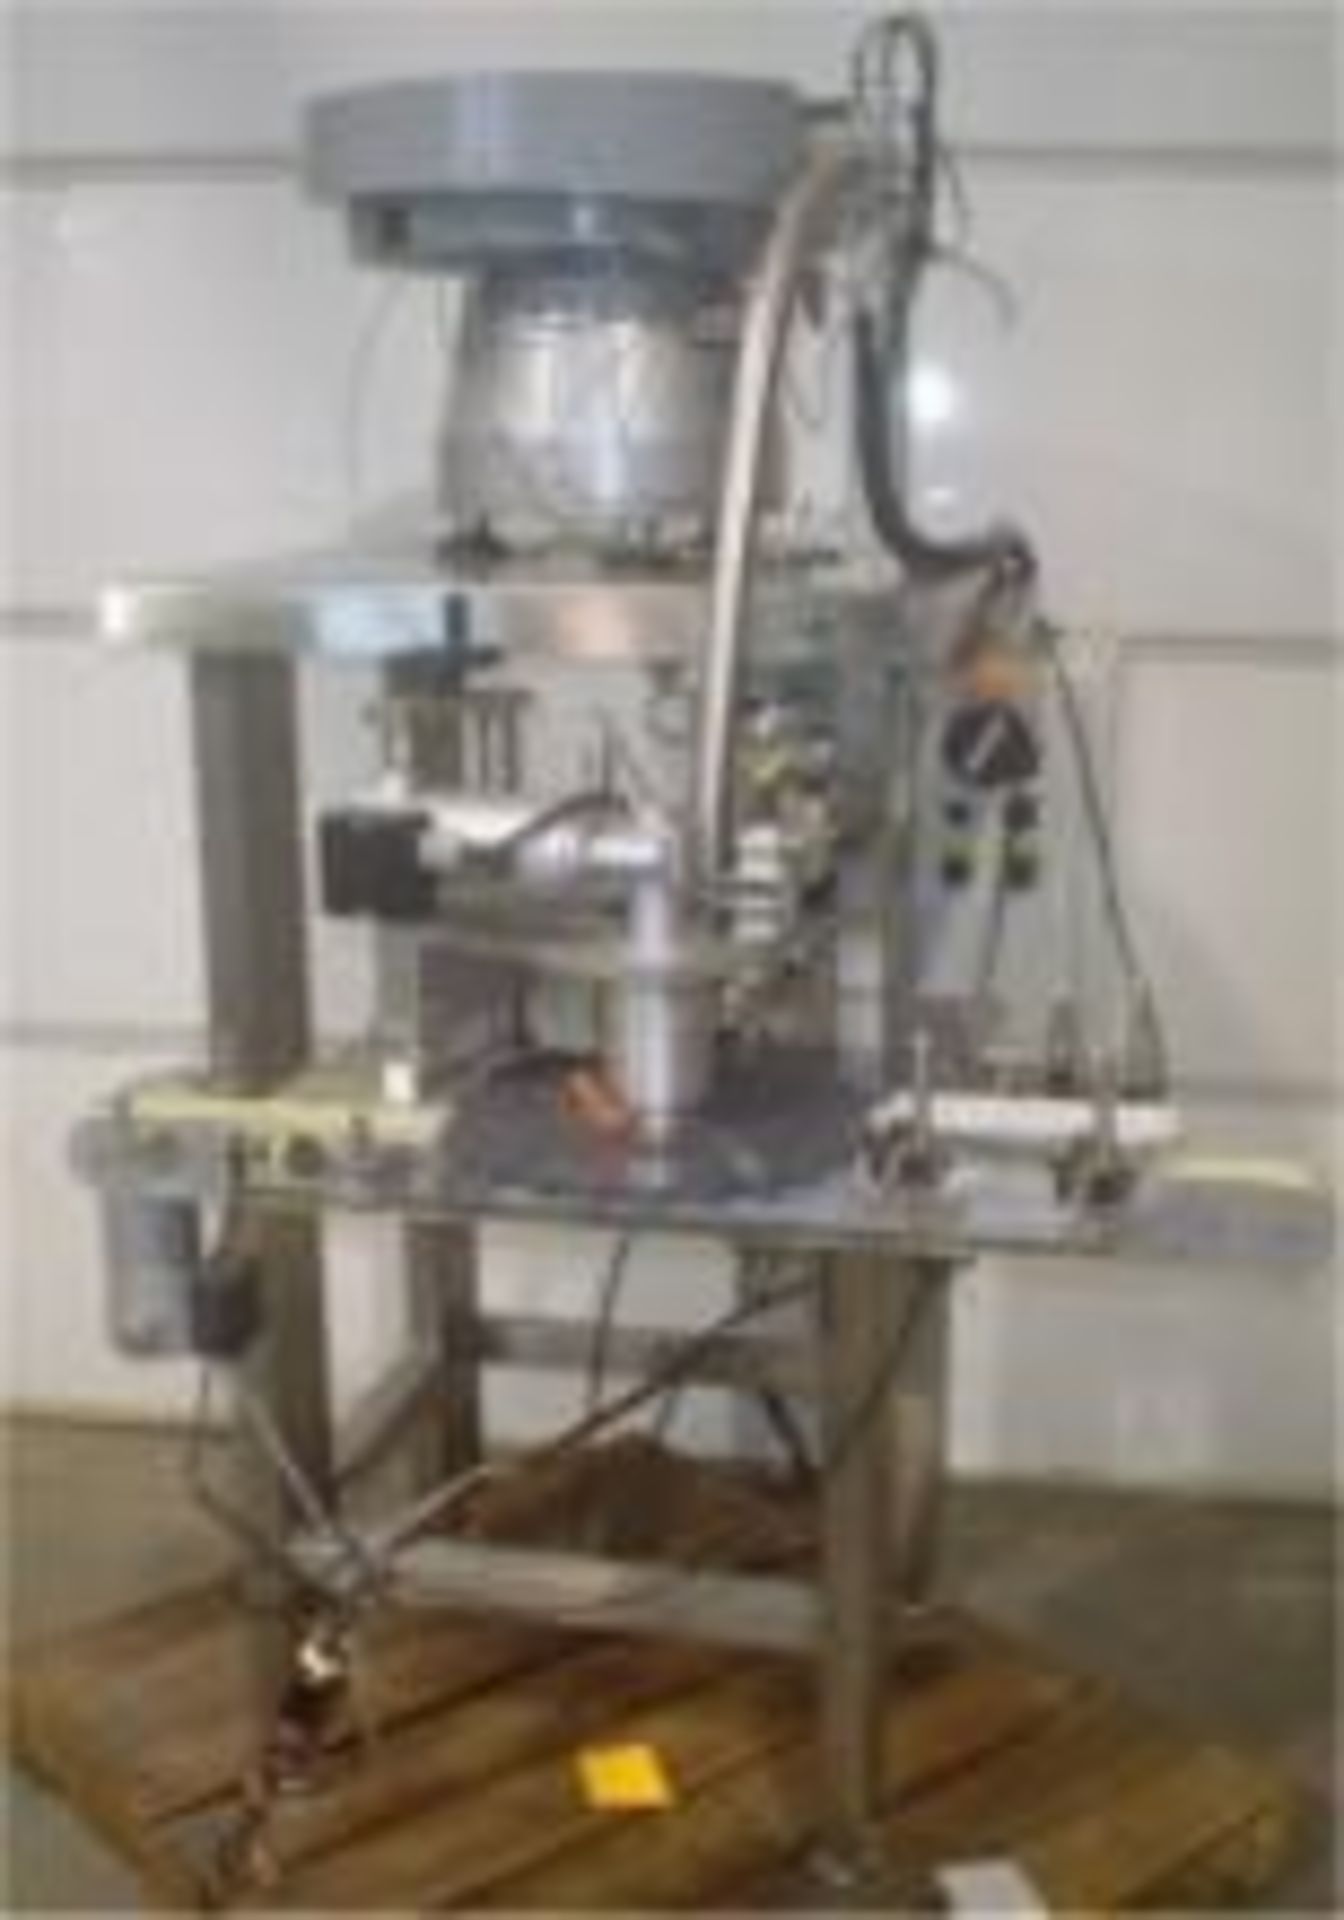 Used DL Tech Rotary Lipstick Inserter. Unit comes with a 35” Long x 2” Wide Rubber Belt and